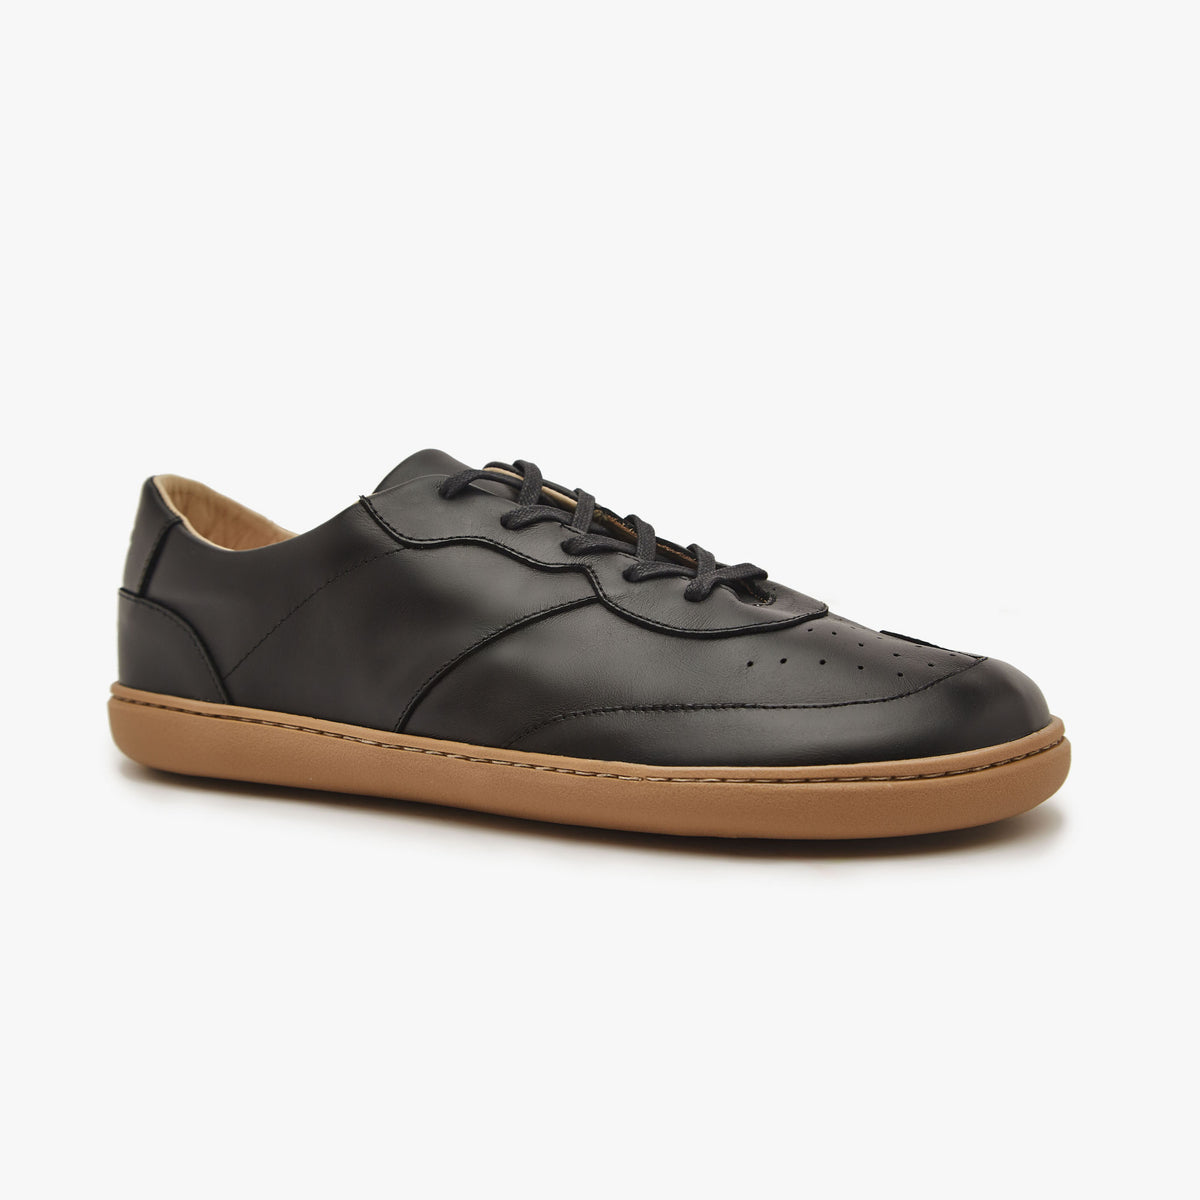 Barefoot Shoes - Men - Natural Leather - Black - The Retro Sneakers ...